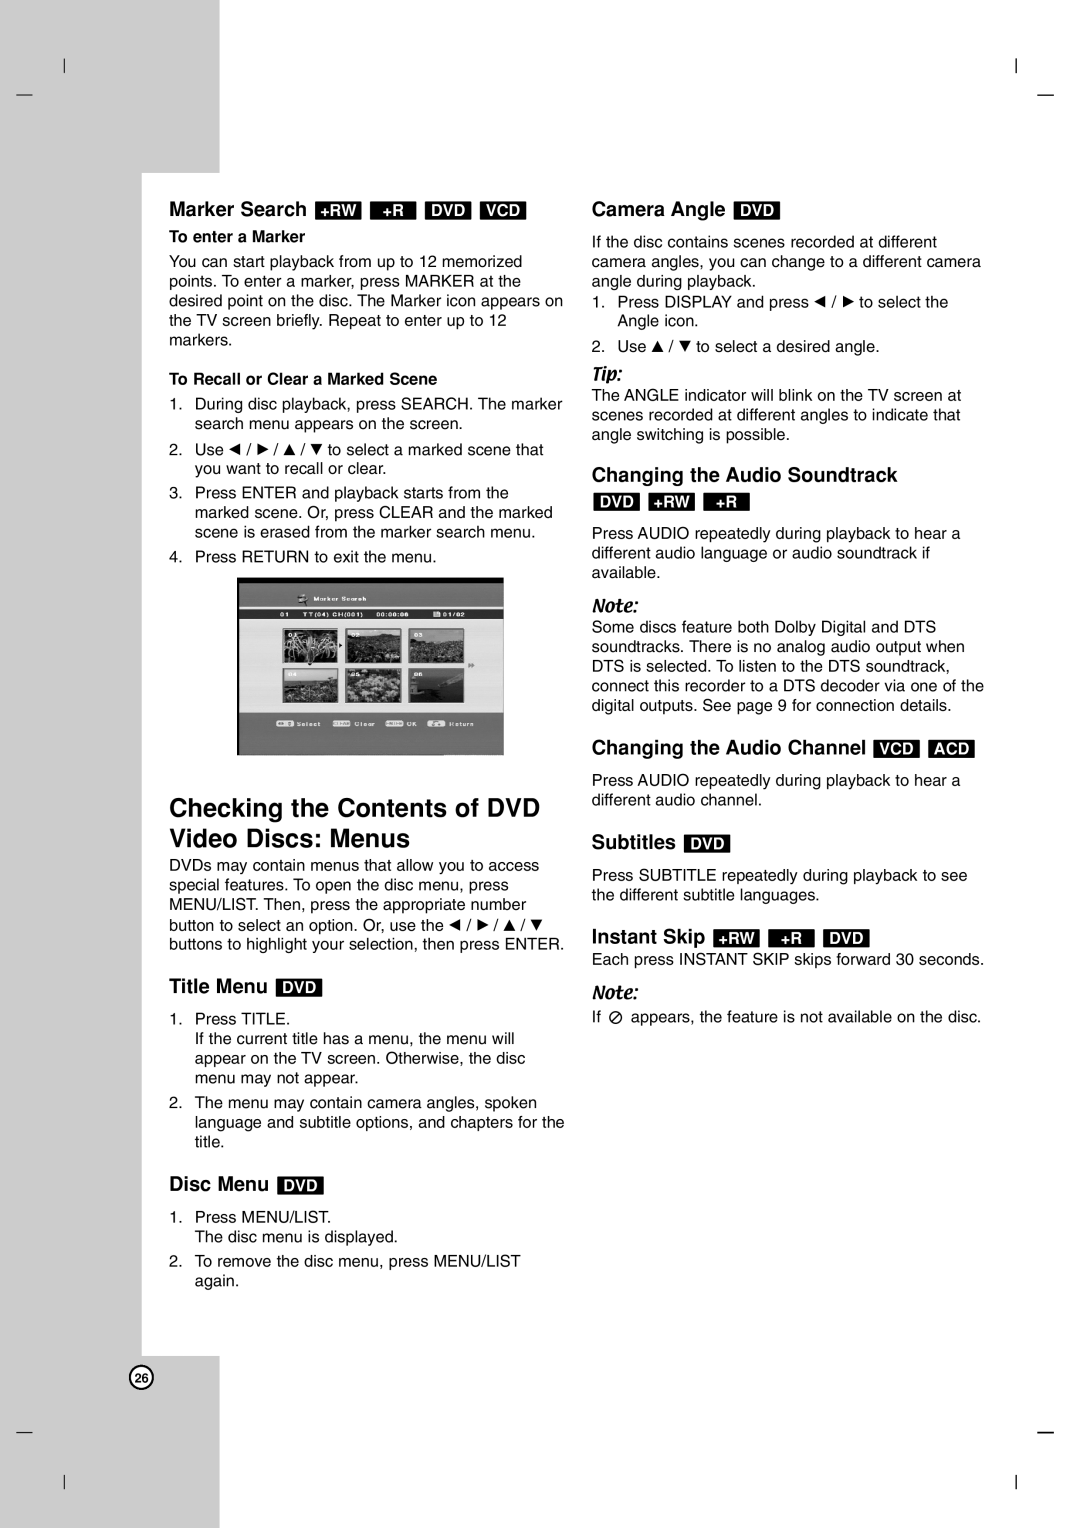 LG Electronics DR7400 Checking the Contents of DVD Video Discs Menus, Marker Search +RW +R DVD VCD, Title Menu DVD 